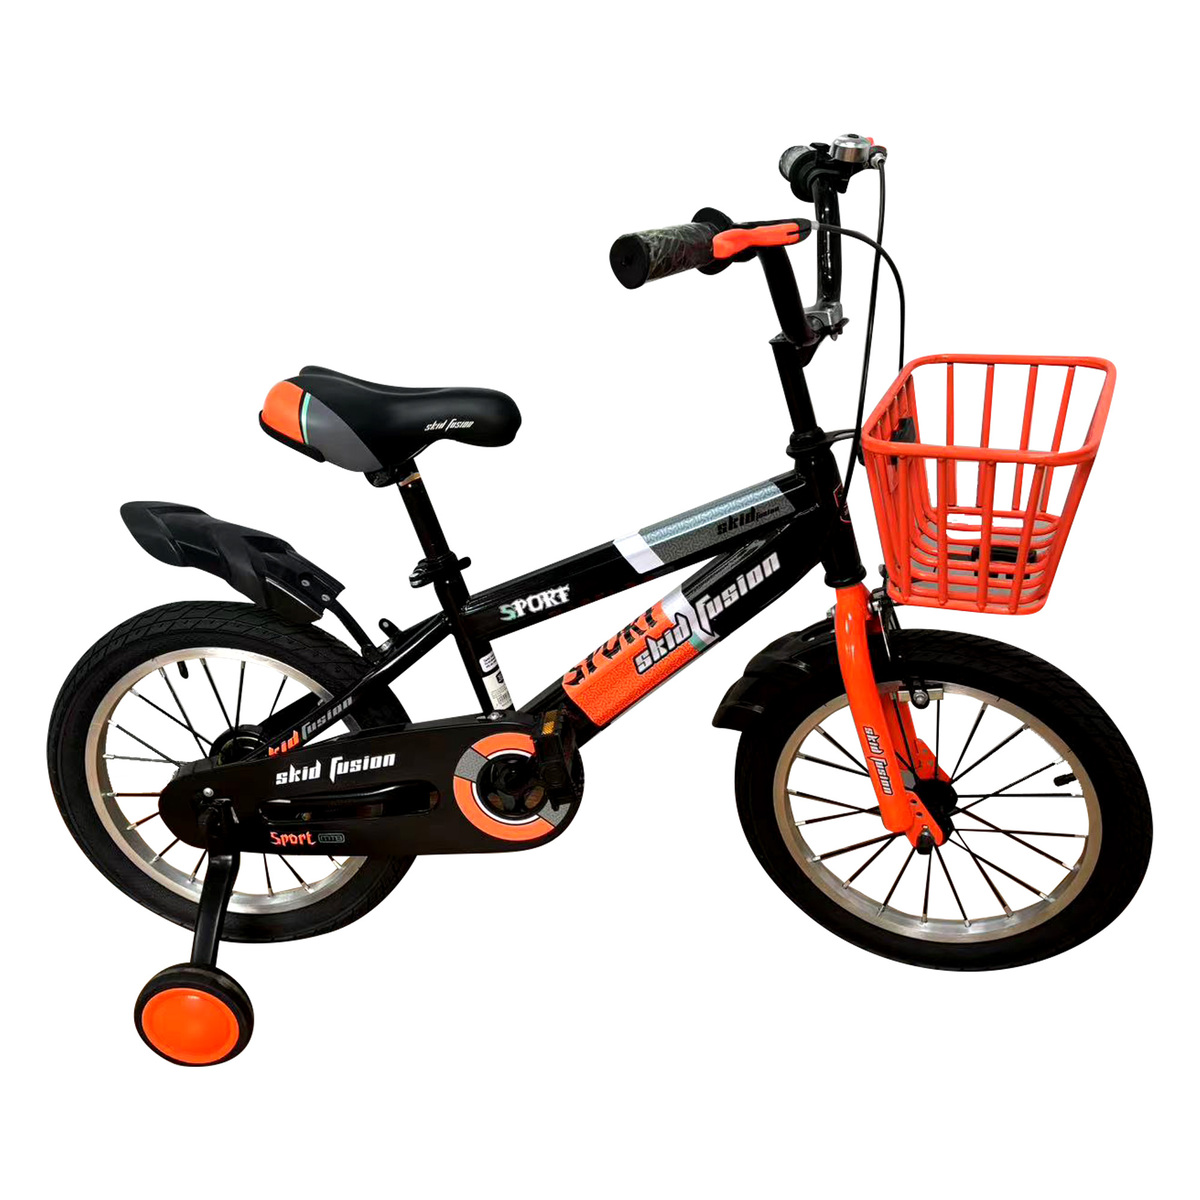 Skid Fusion Kids Bicycle 12" XFX-12 Assorted Color